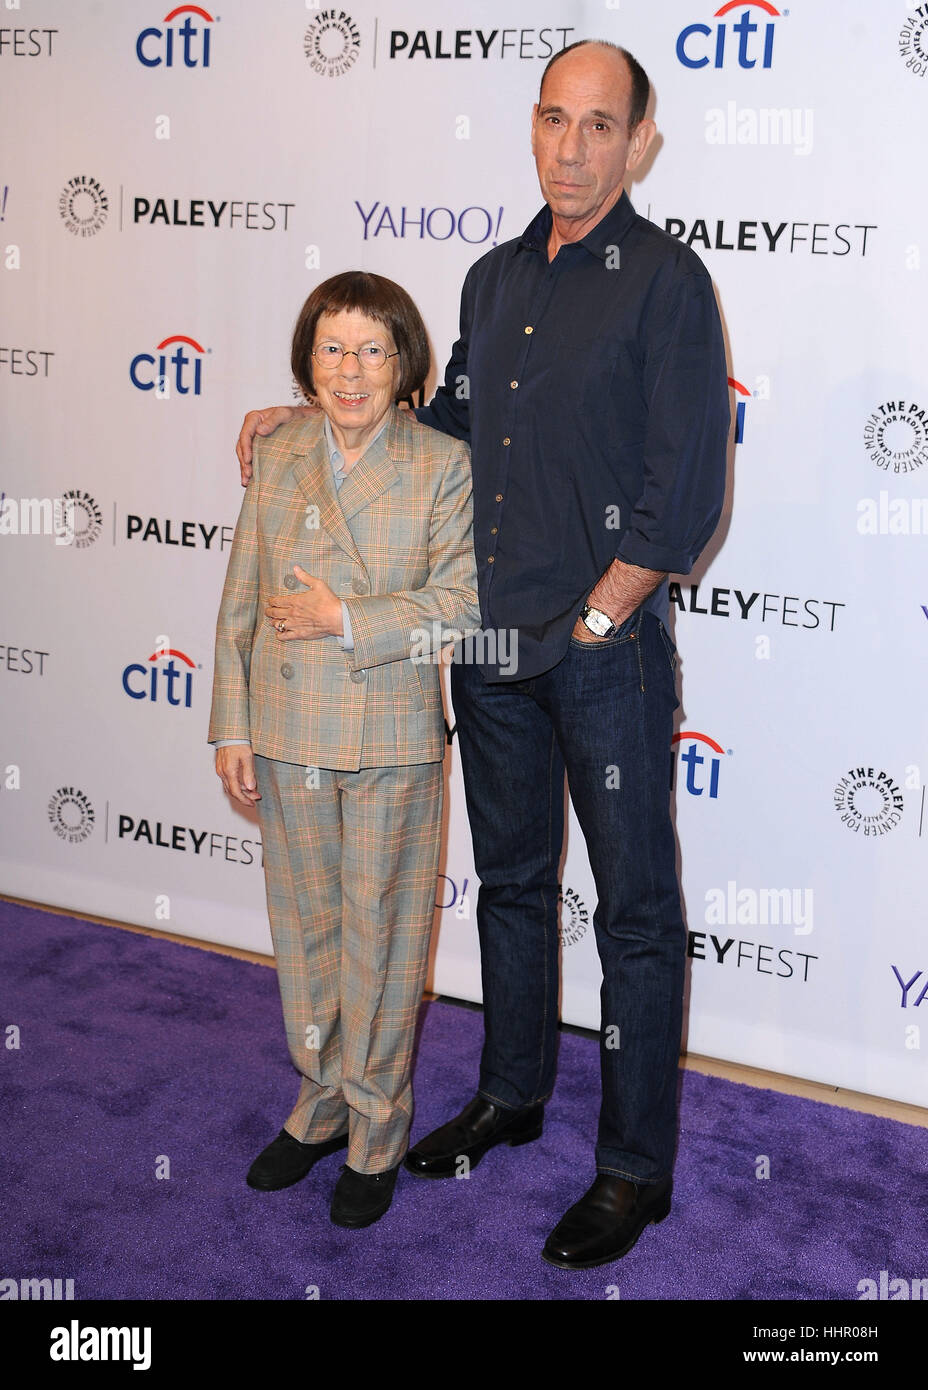 Beverly Hills, USA. 11th Sep, 2017. Linda Hunt and Miguel Ferrer at the 11th Annual PaleyFest Fall Preview of Univision's 'NCIS: Los Angeles' at the Paley Center for the Media in Beverly Hills. Credit: Pgsk/Media Punch/Alamy Live News Stock Photo